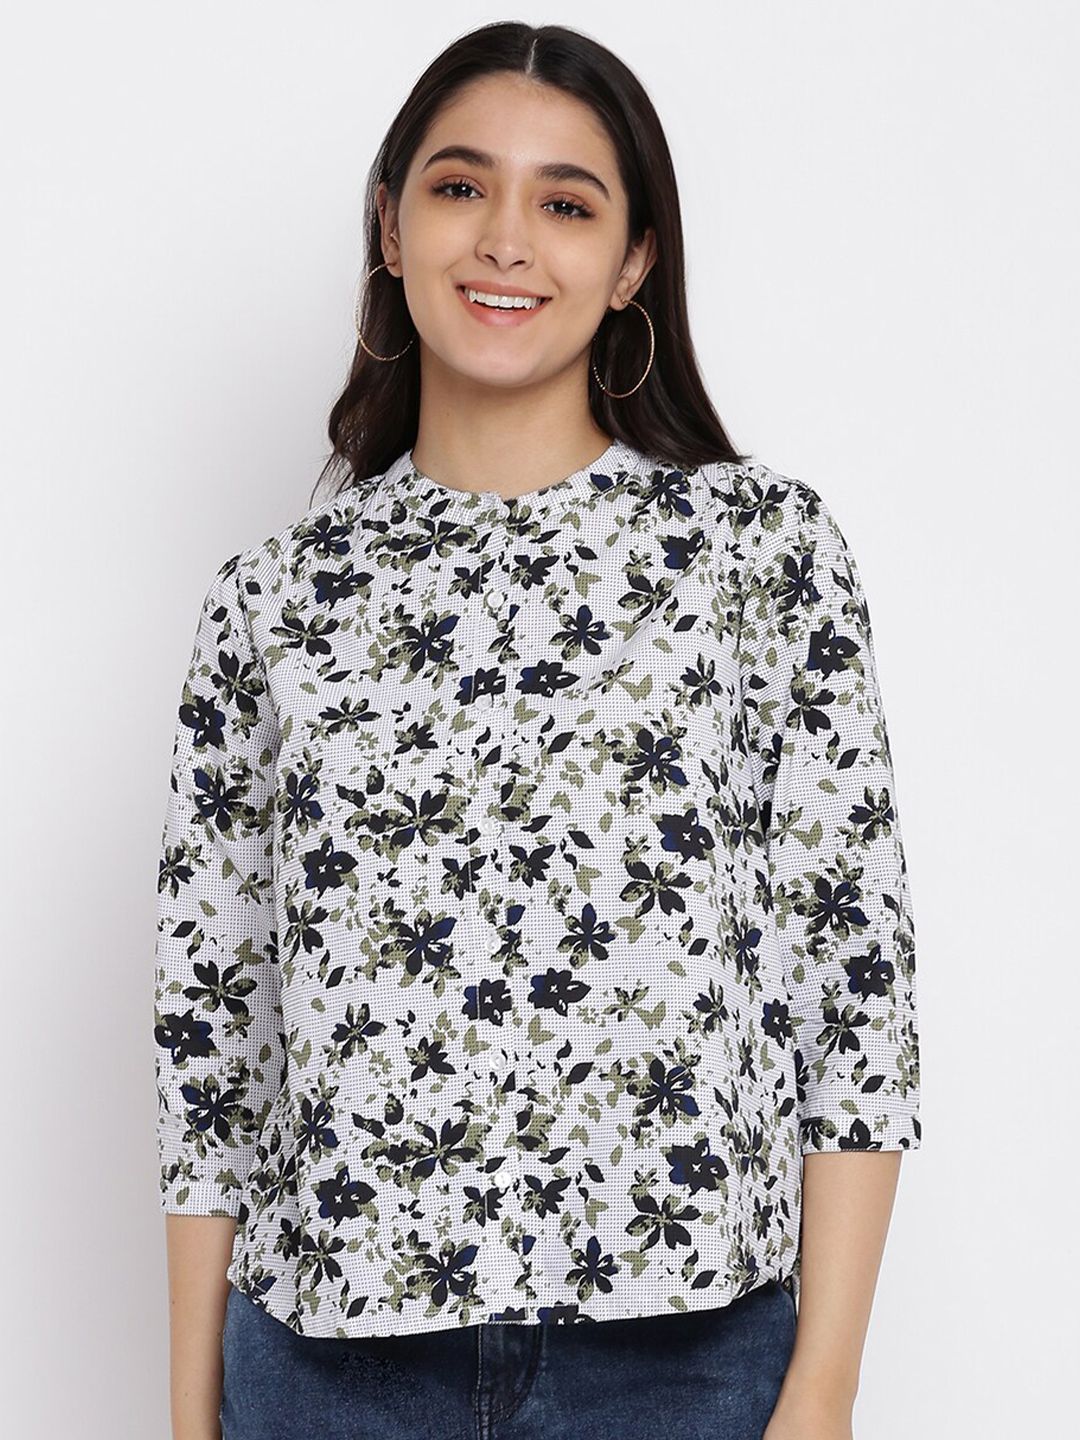 abof Off White & Green Floral Print Top Price in India